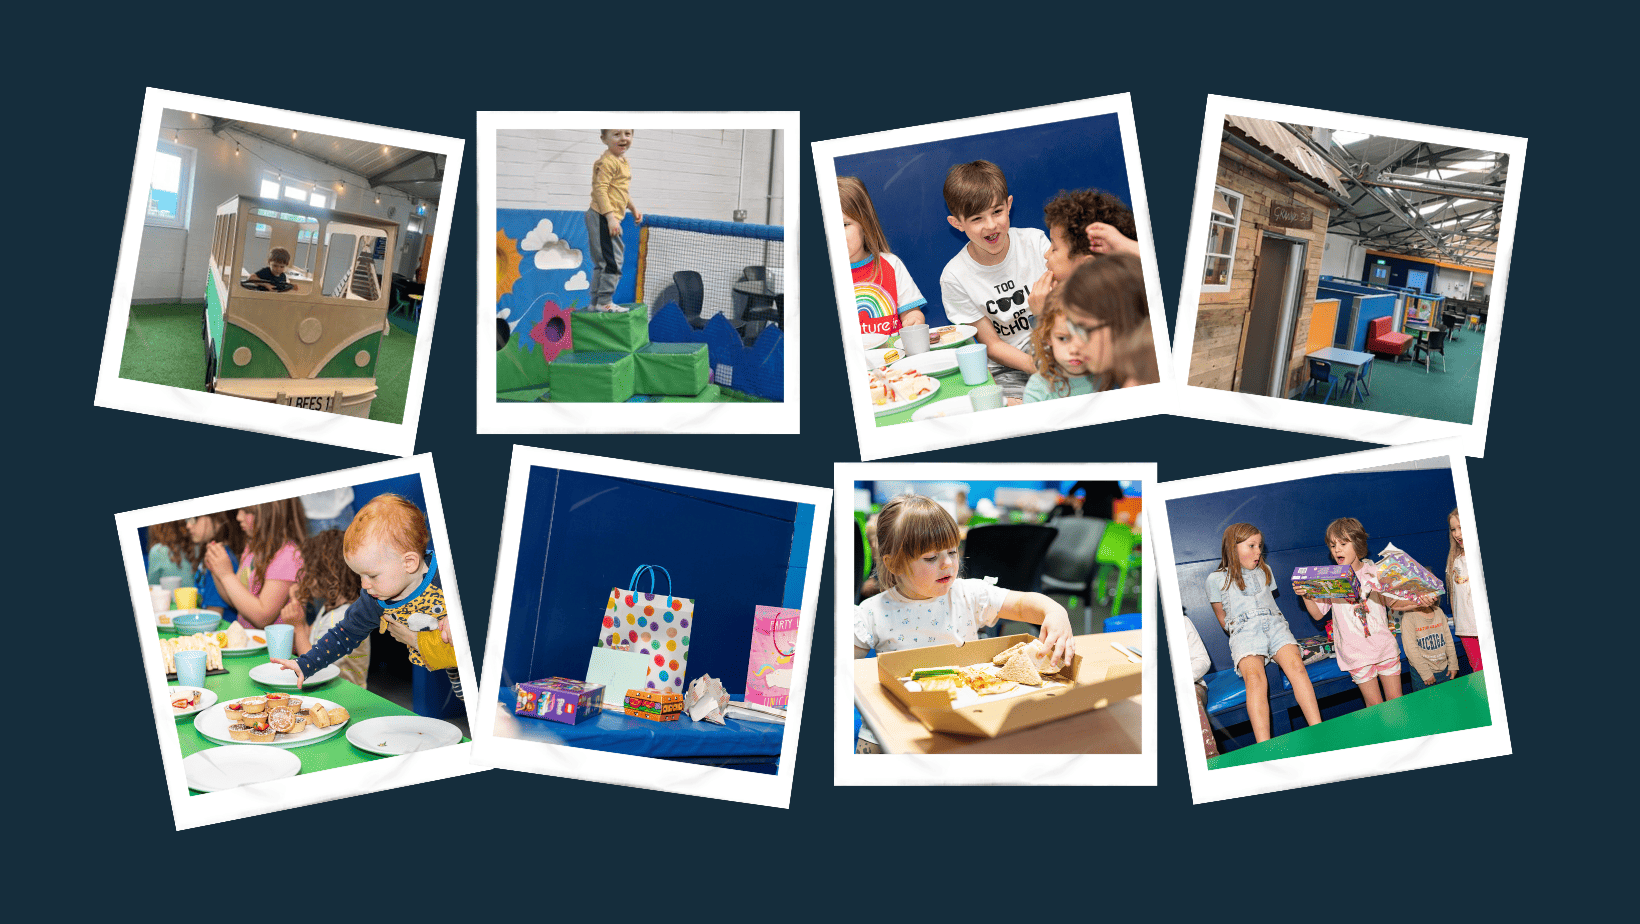 Soft play kids party at Little bees leeds slider image for party page